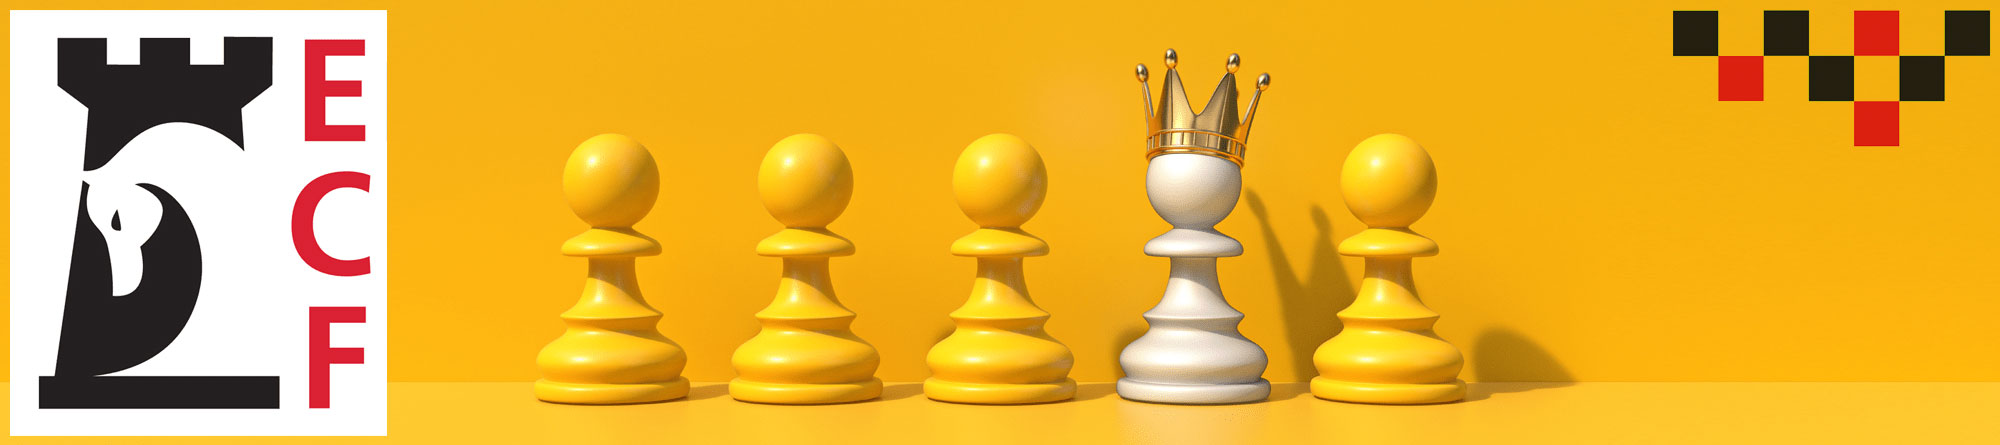 Chess Ratings and Chess Titles : The Chess Rating System Explained